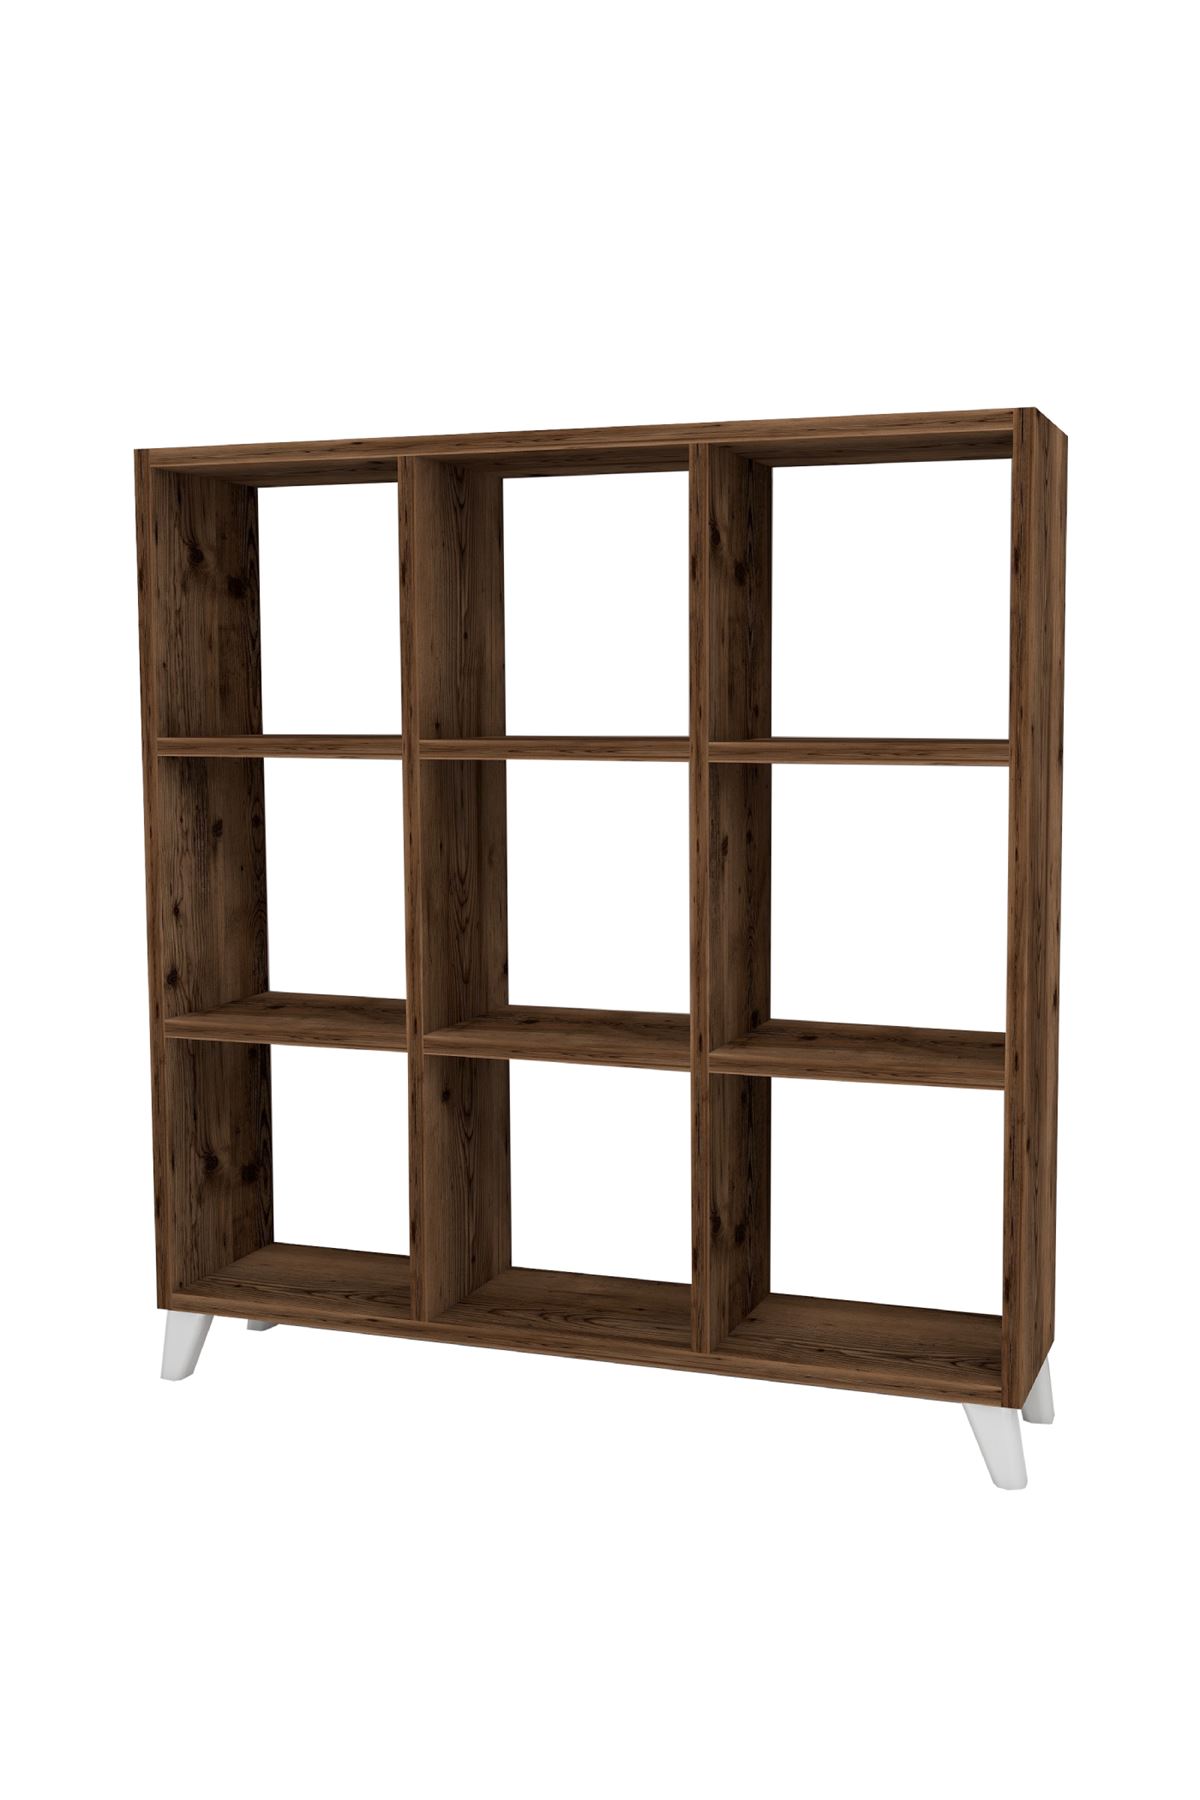 Bofigo Cube Bookshelf with 9 Sections and Shelves Square Bookcase Library Lidya